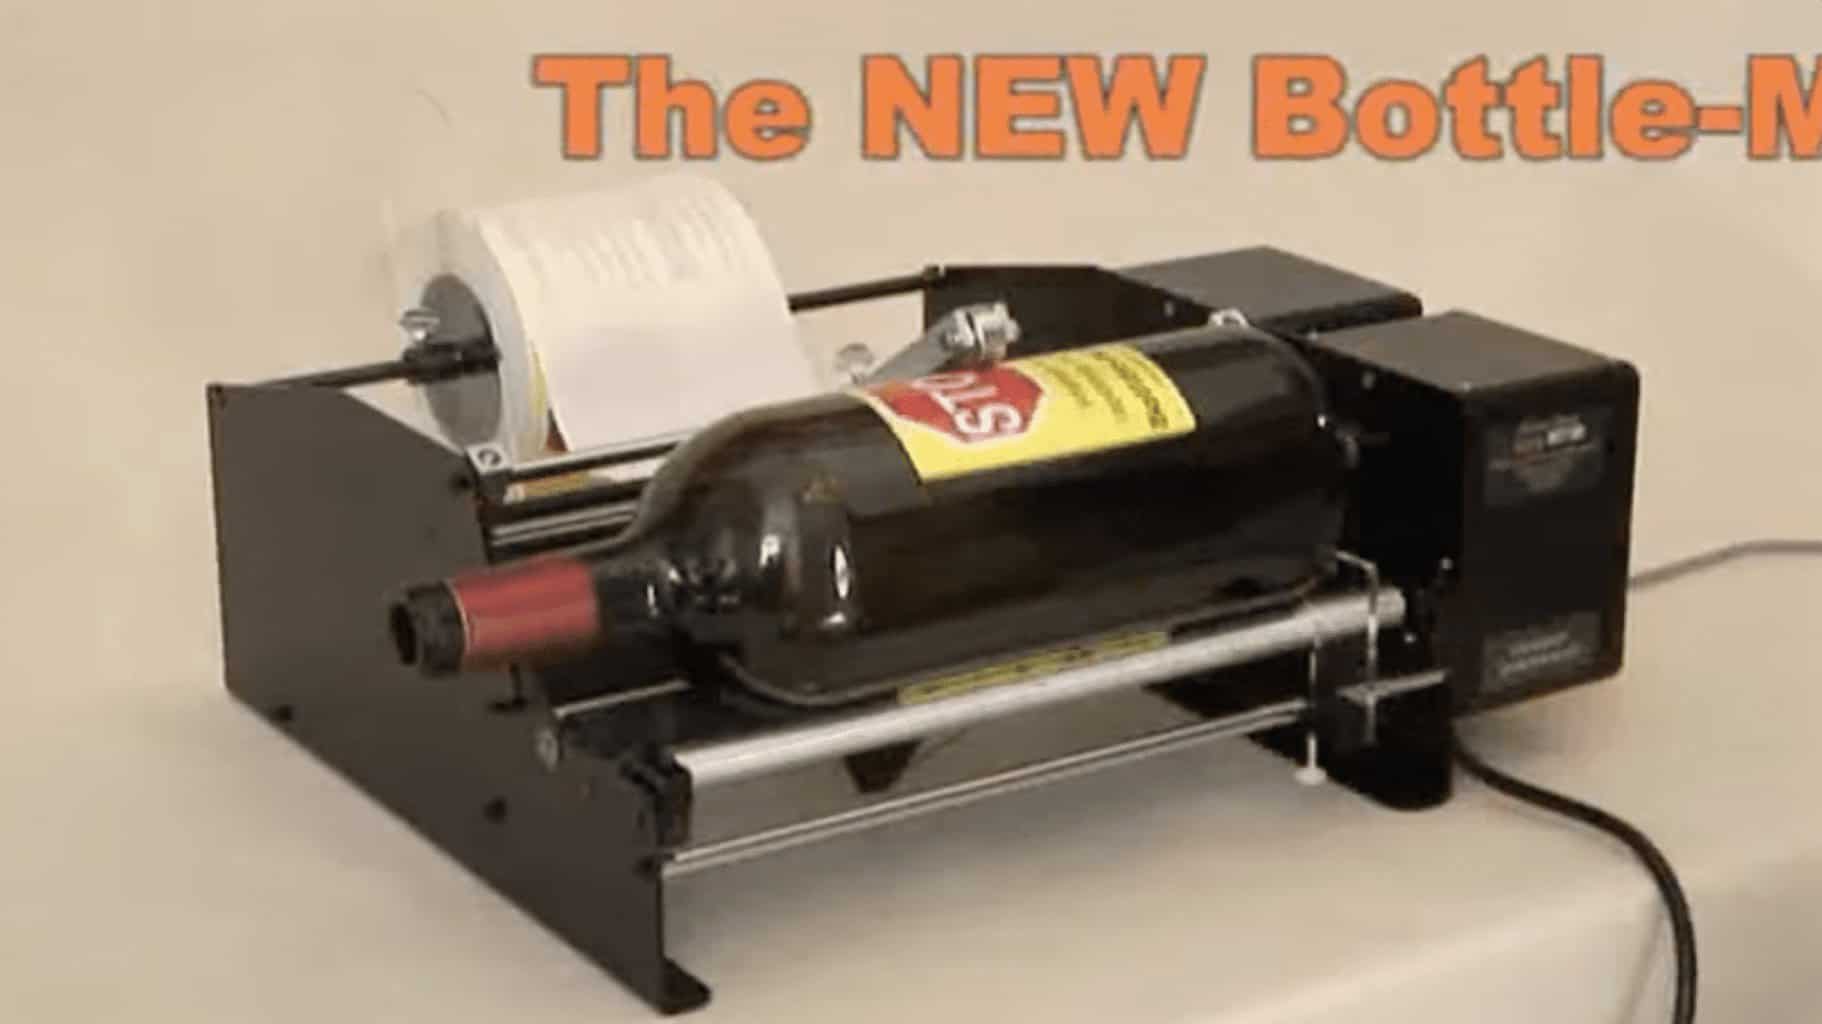 DELUXE Model Dispensa-Matic Single Label Bottle-Matic 10" Electric Label Applicator / Label Dispenser (10" Base) SKU: Bottle-Matic-10-Single-Deluxe Screen Shot 2022 03 14 at 4.37.30 PM